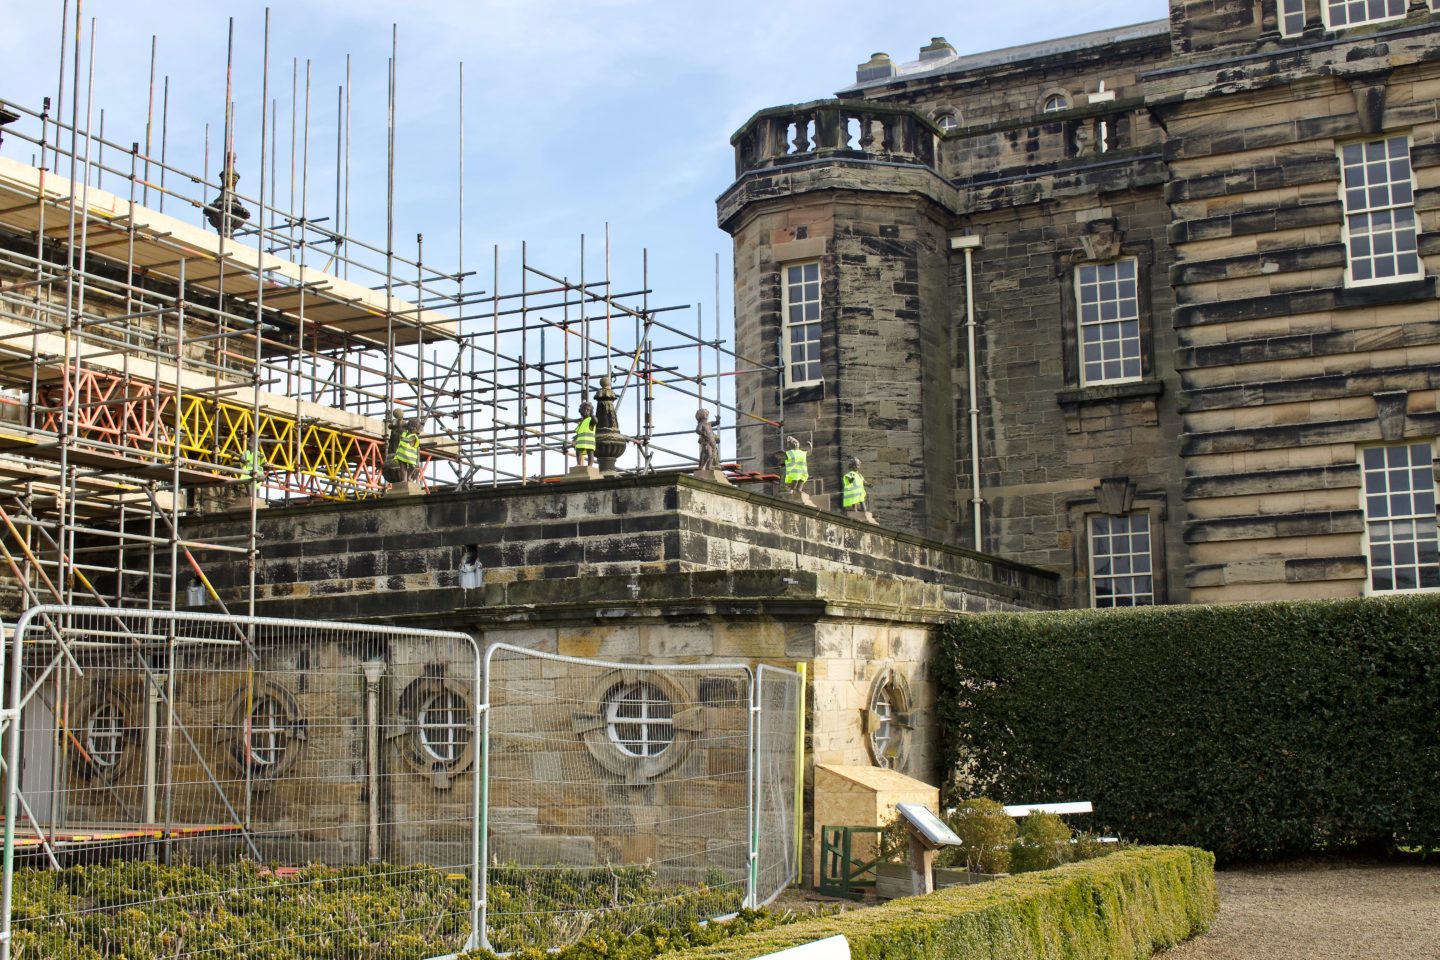 AD: Seaton Delaval Hall is under construction - what to expect...